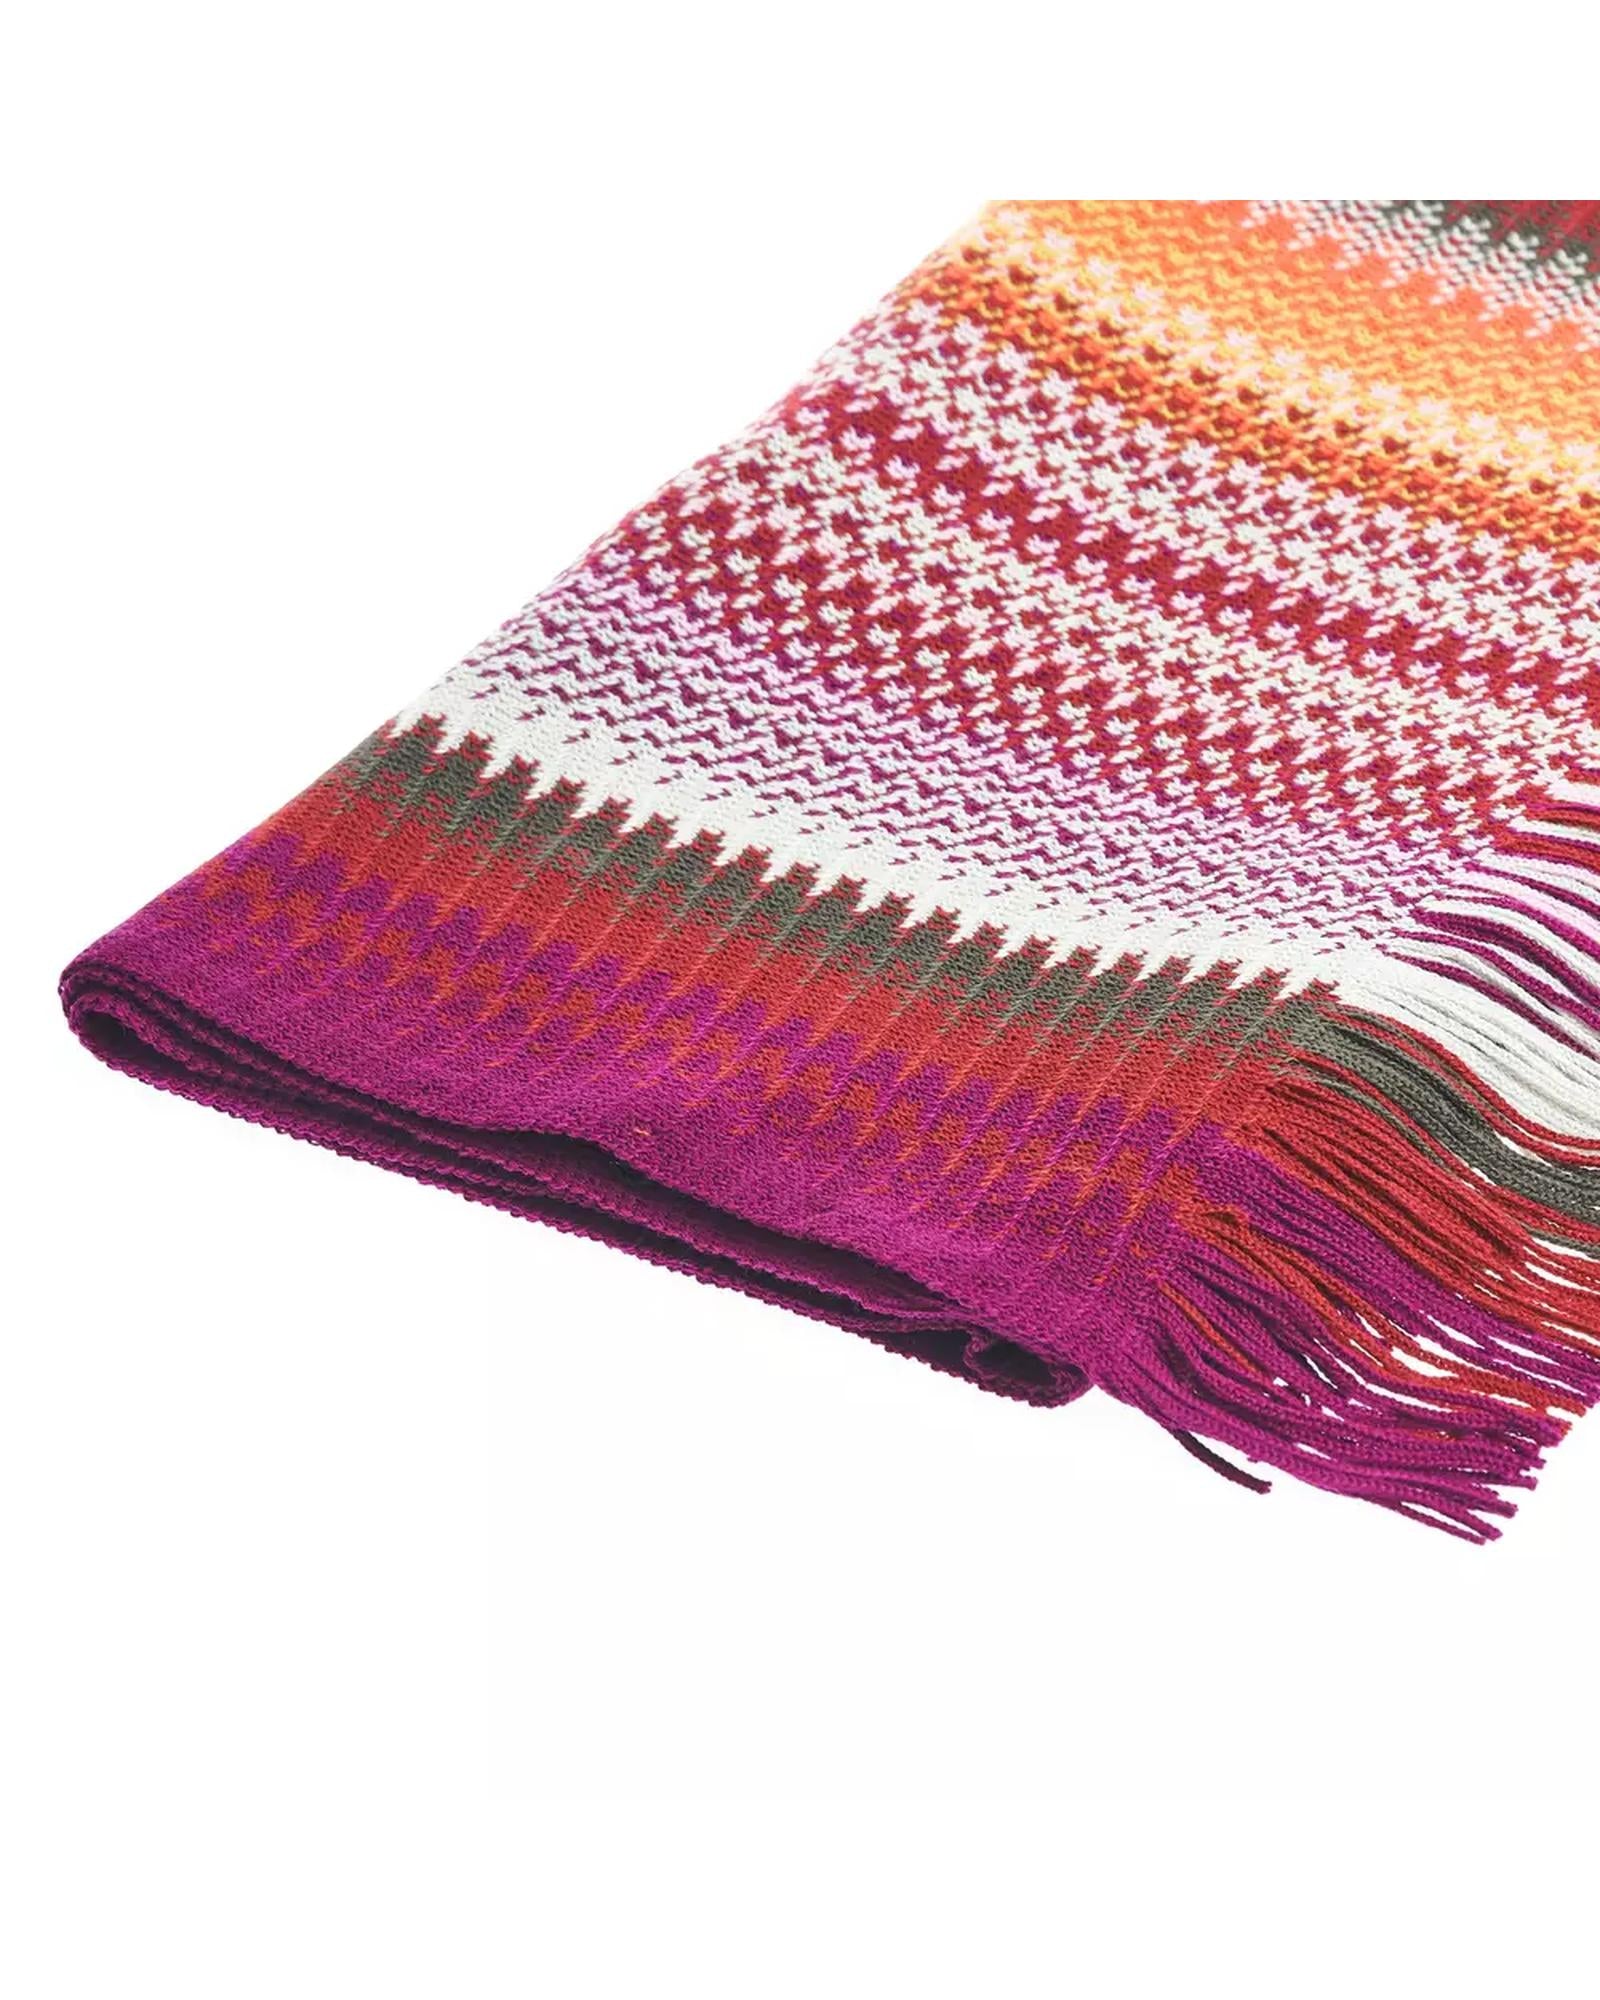 Geometric Pattern Fringed Scarf with Bright Colors One Size Men